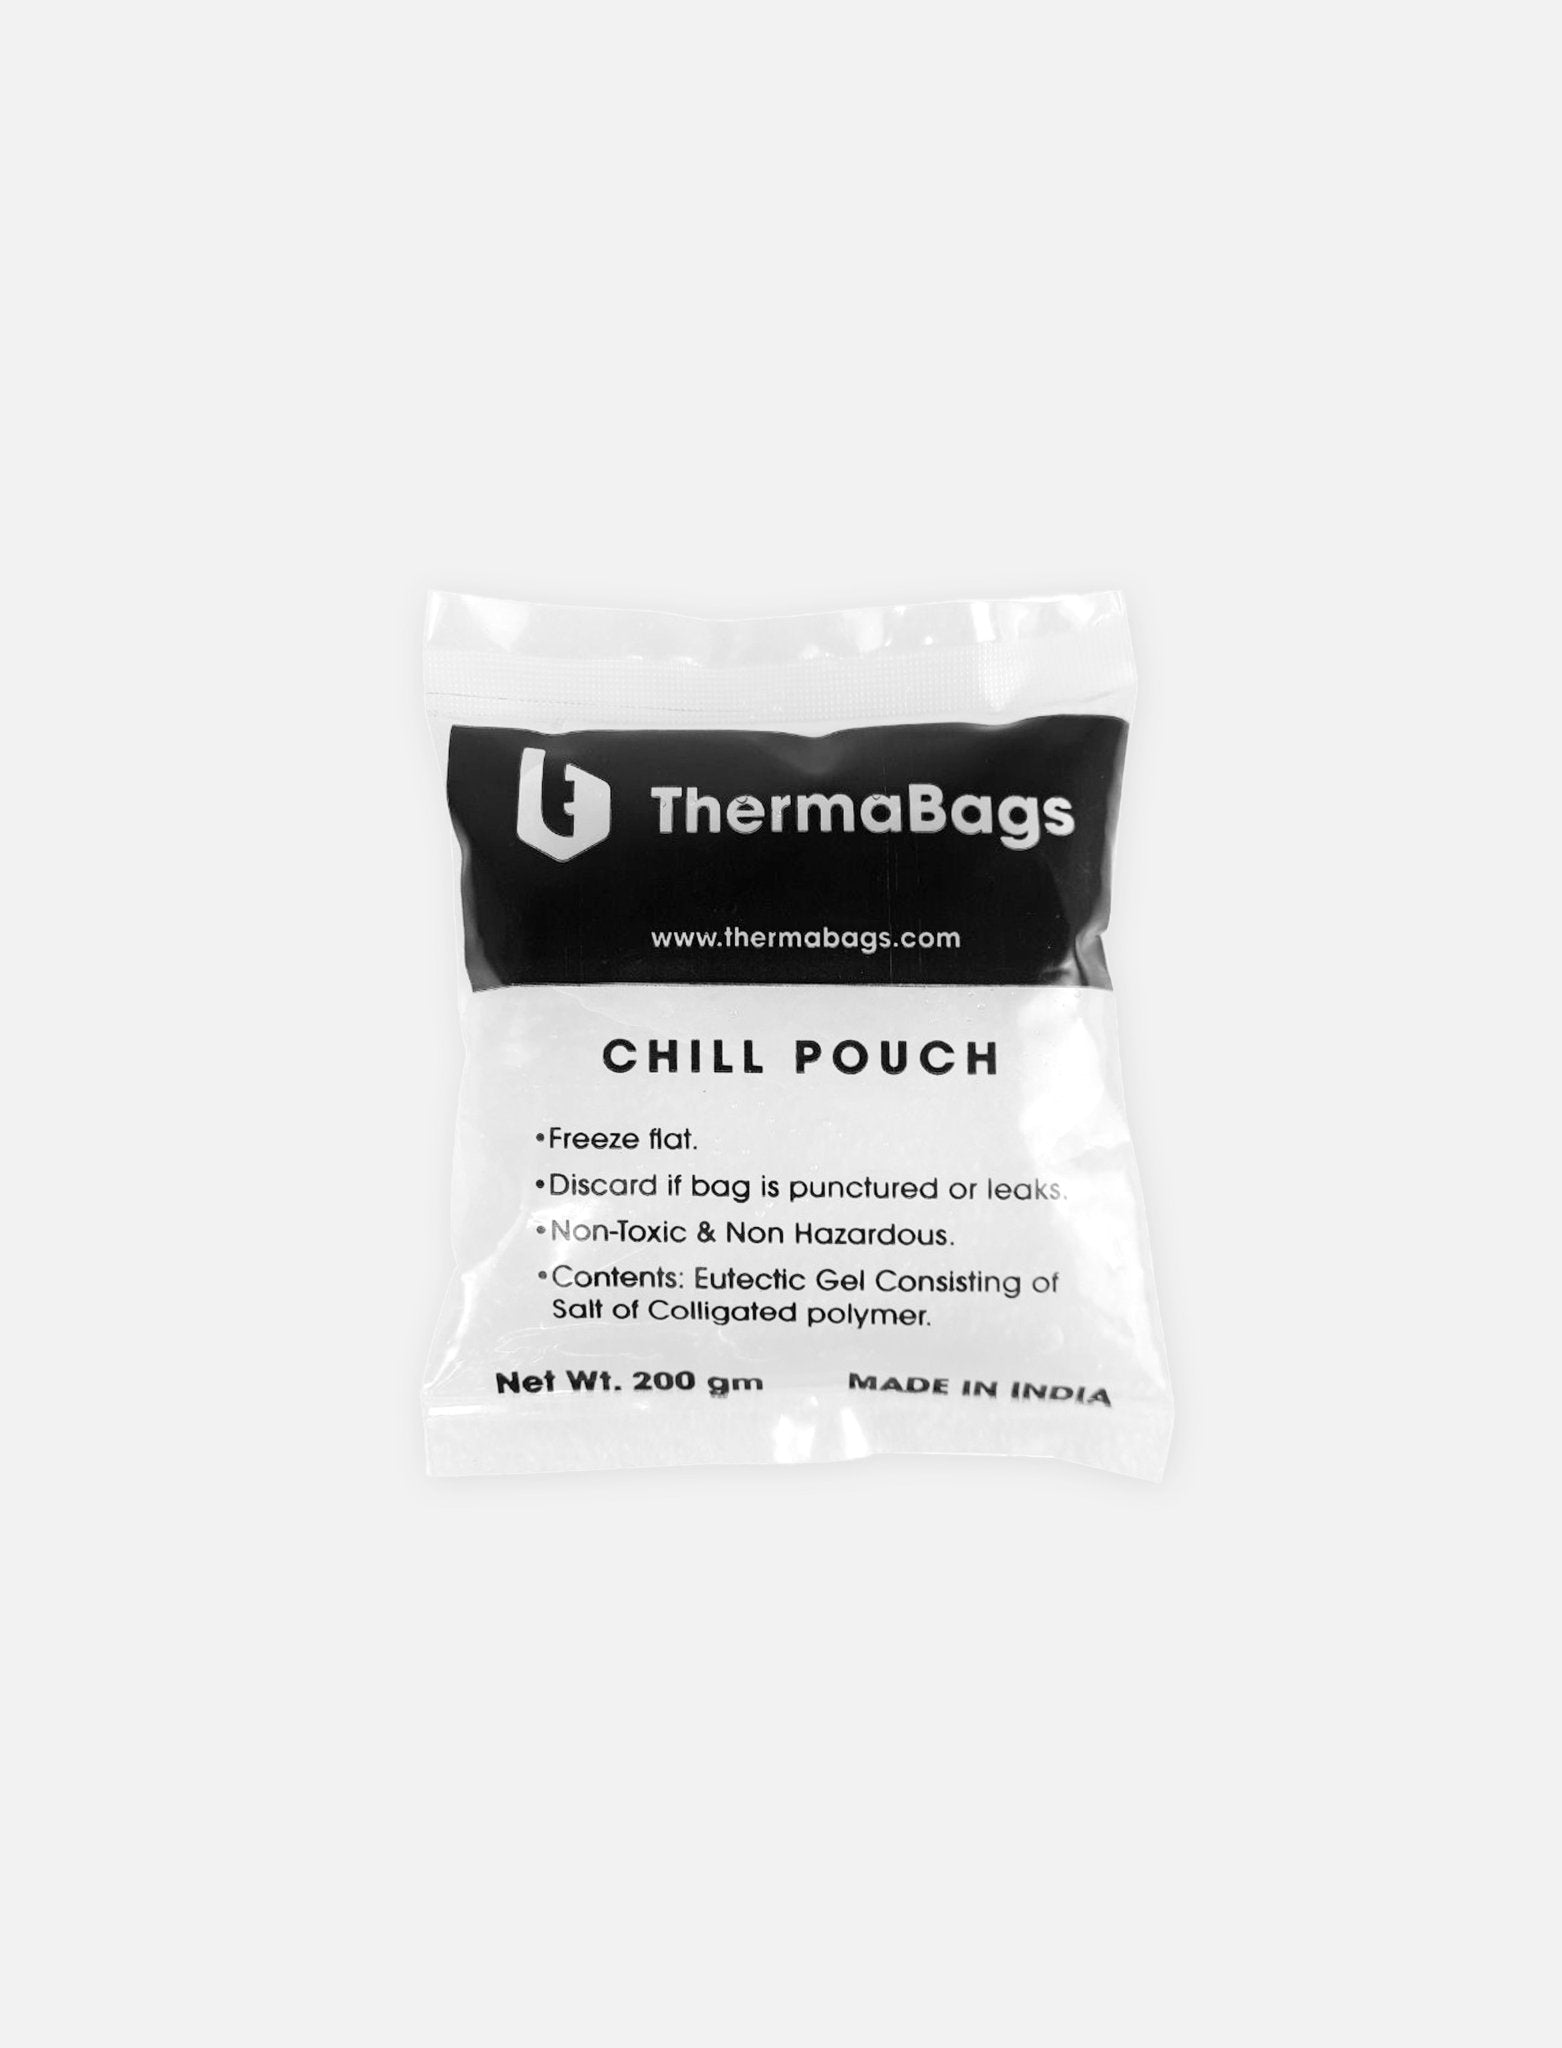 Ice Pack - thermabags